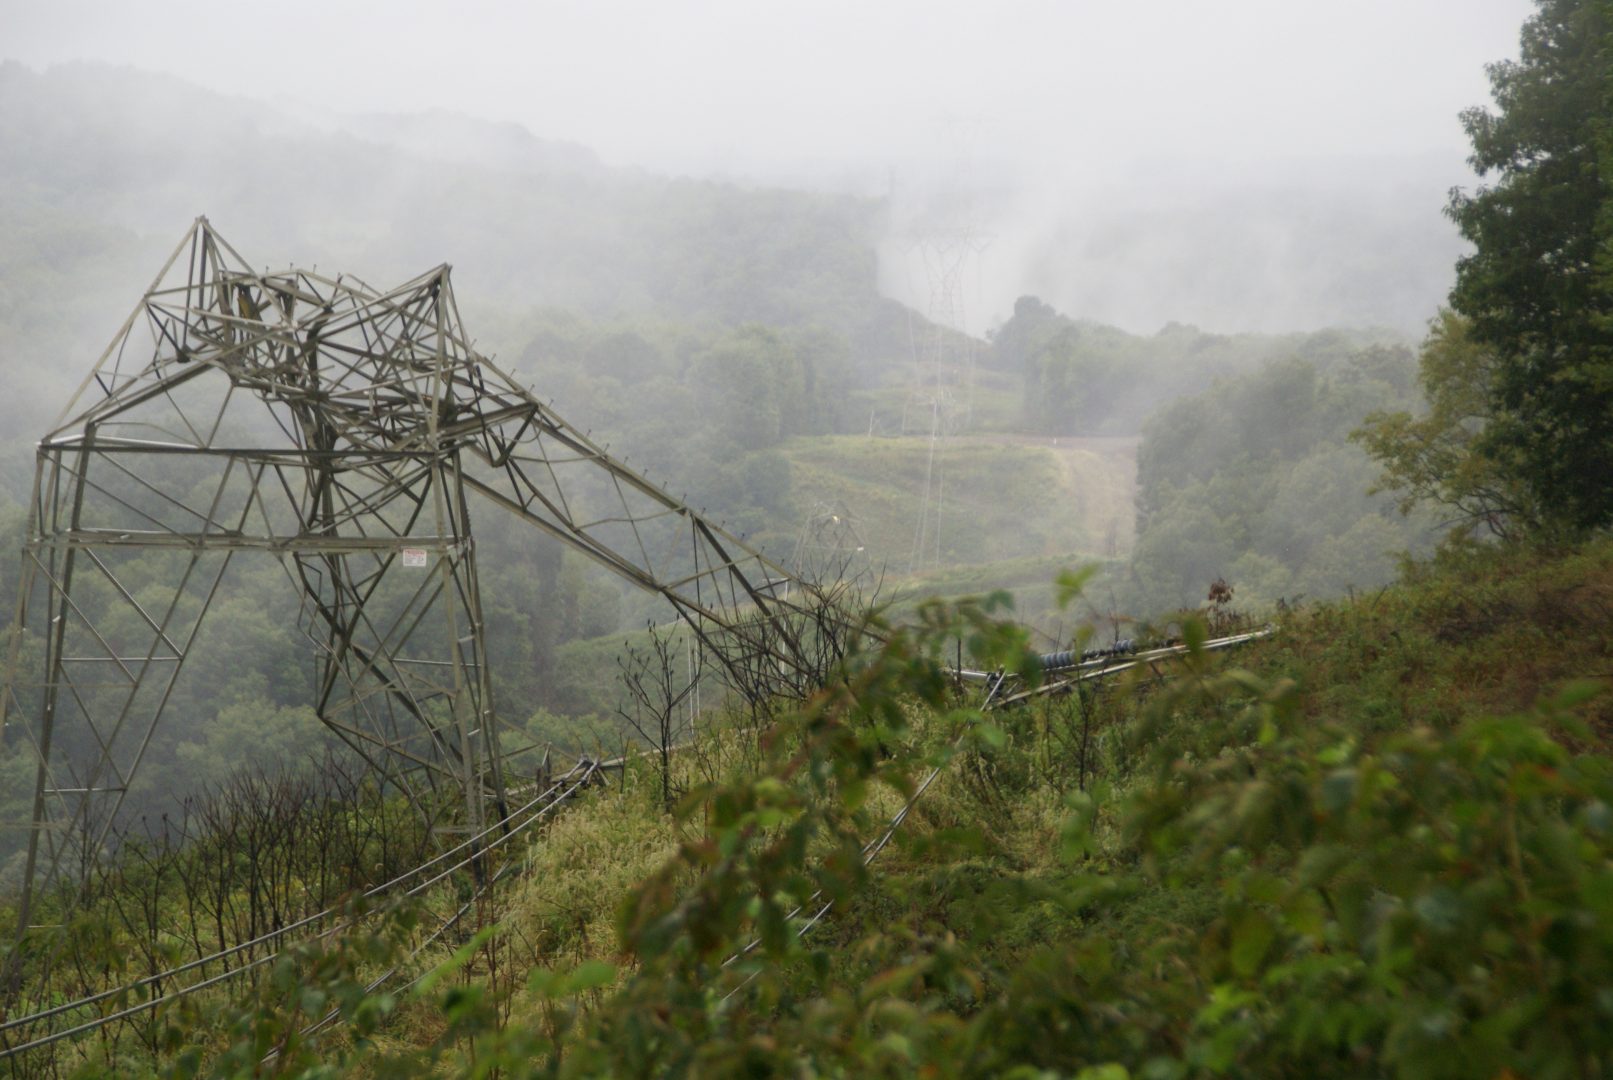 A natural gas pipeline explosion in September 2018 in Beaver County destroyed one home and also damaged power line towers such as this one.